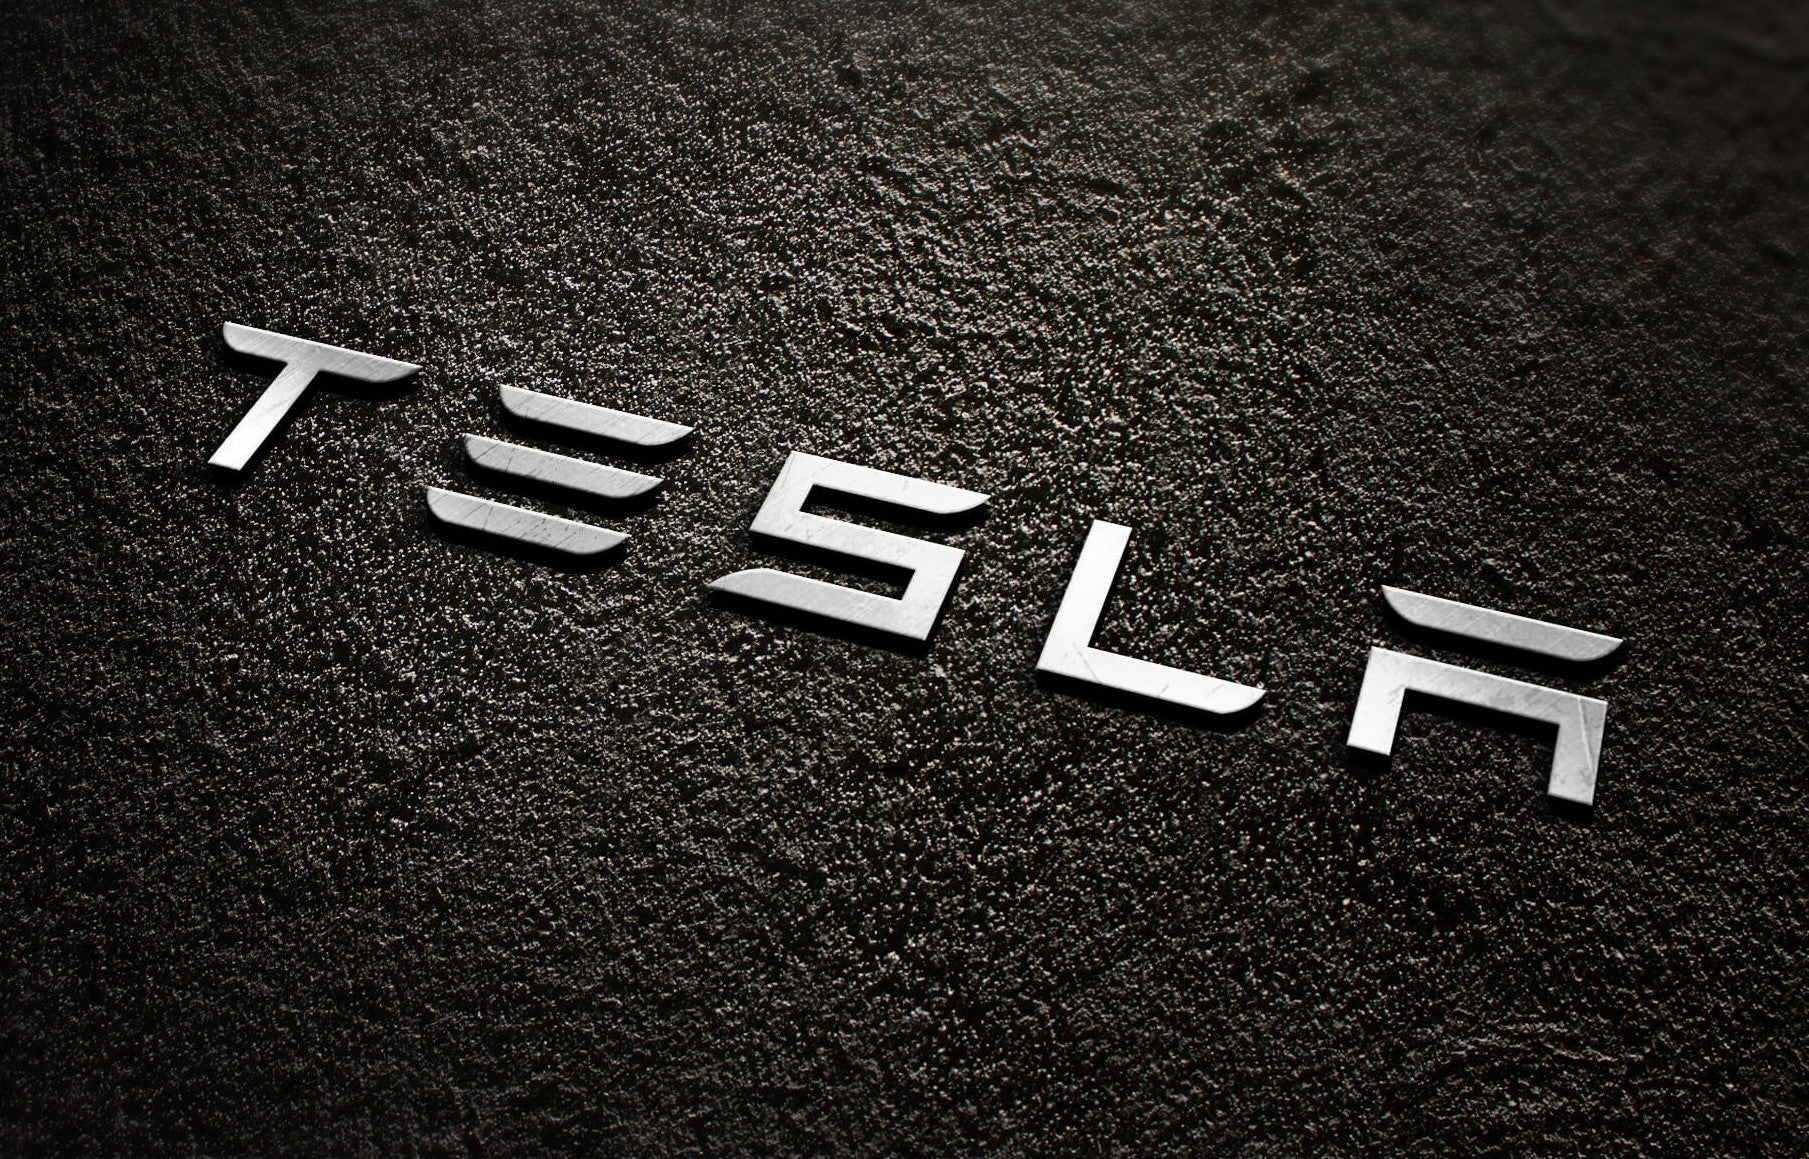 Tesla Is #1 In Transportation Among World’s 50 Most Innovative Companies 2020